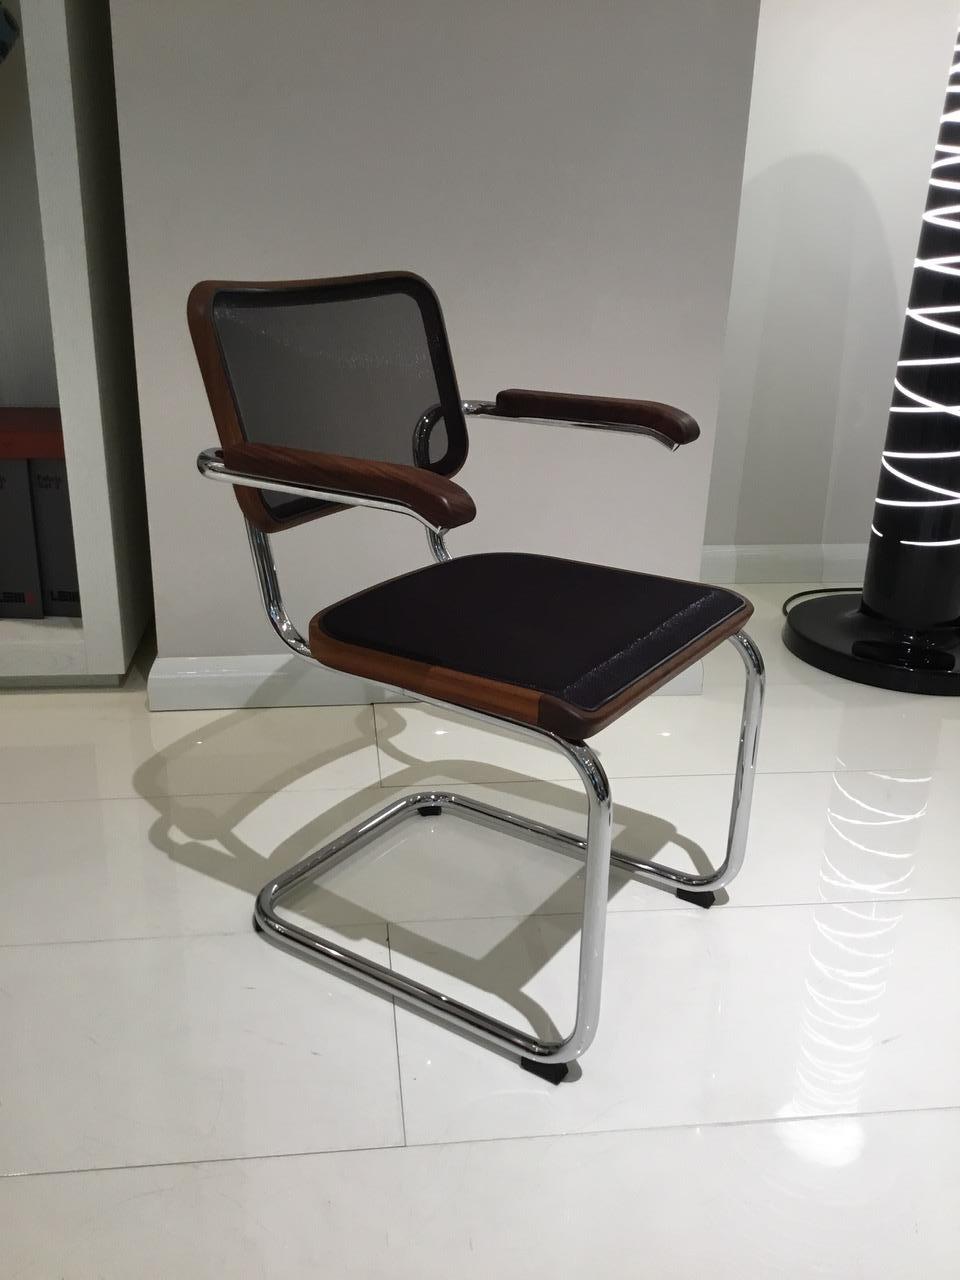 The cantilever chair S 32 and the version S 64 with armrests are the most famous tubular steel classics. The appealing combination of new and old contribute to their popularity: Gebrüder T 1819´s tradition in the production of bentwood furniture